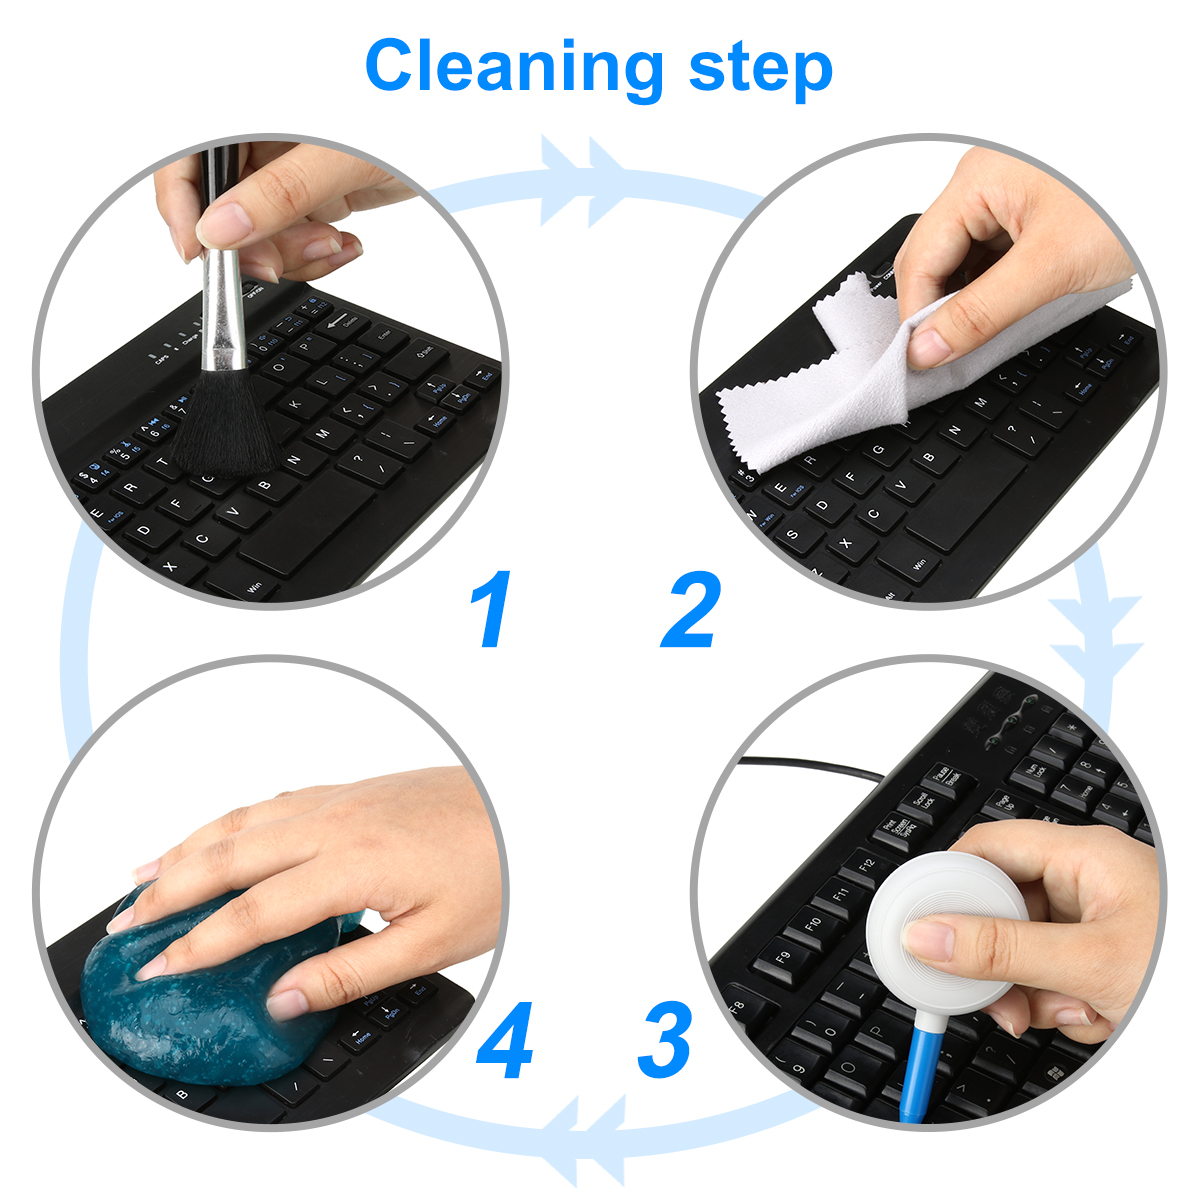 MECO-Cleaning-Gel-Universal-Dust-Cleaner-Gel-Dust-Remover-Keyboard-Cleaning-Tools-for-Keyboards-Car--1795370-8